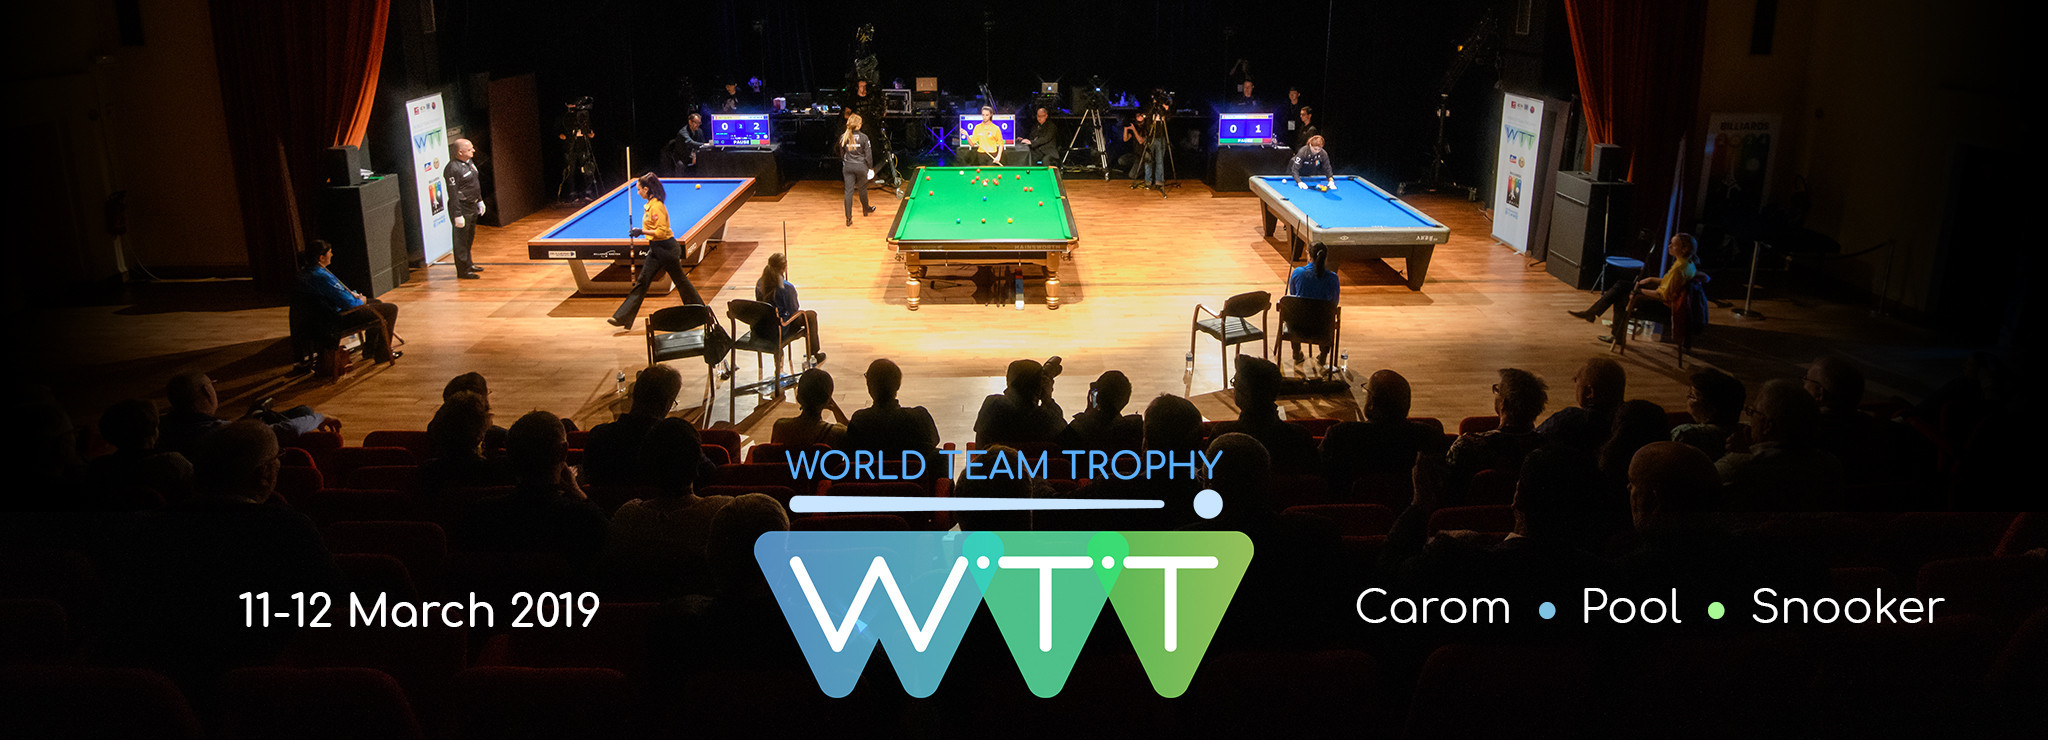 The first World Team Trophy, for pool, carom and snooker, is underway near Paris ©WCBS